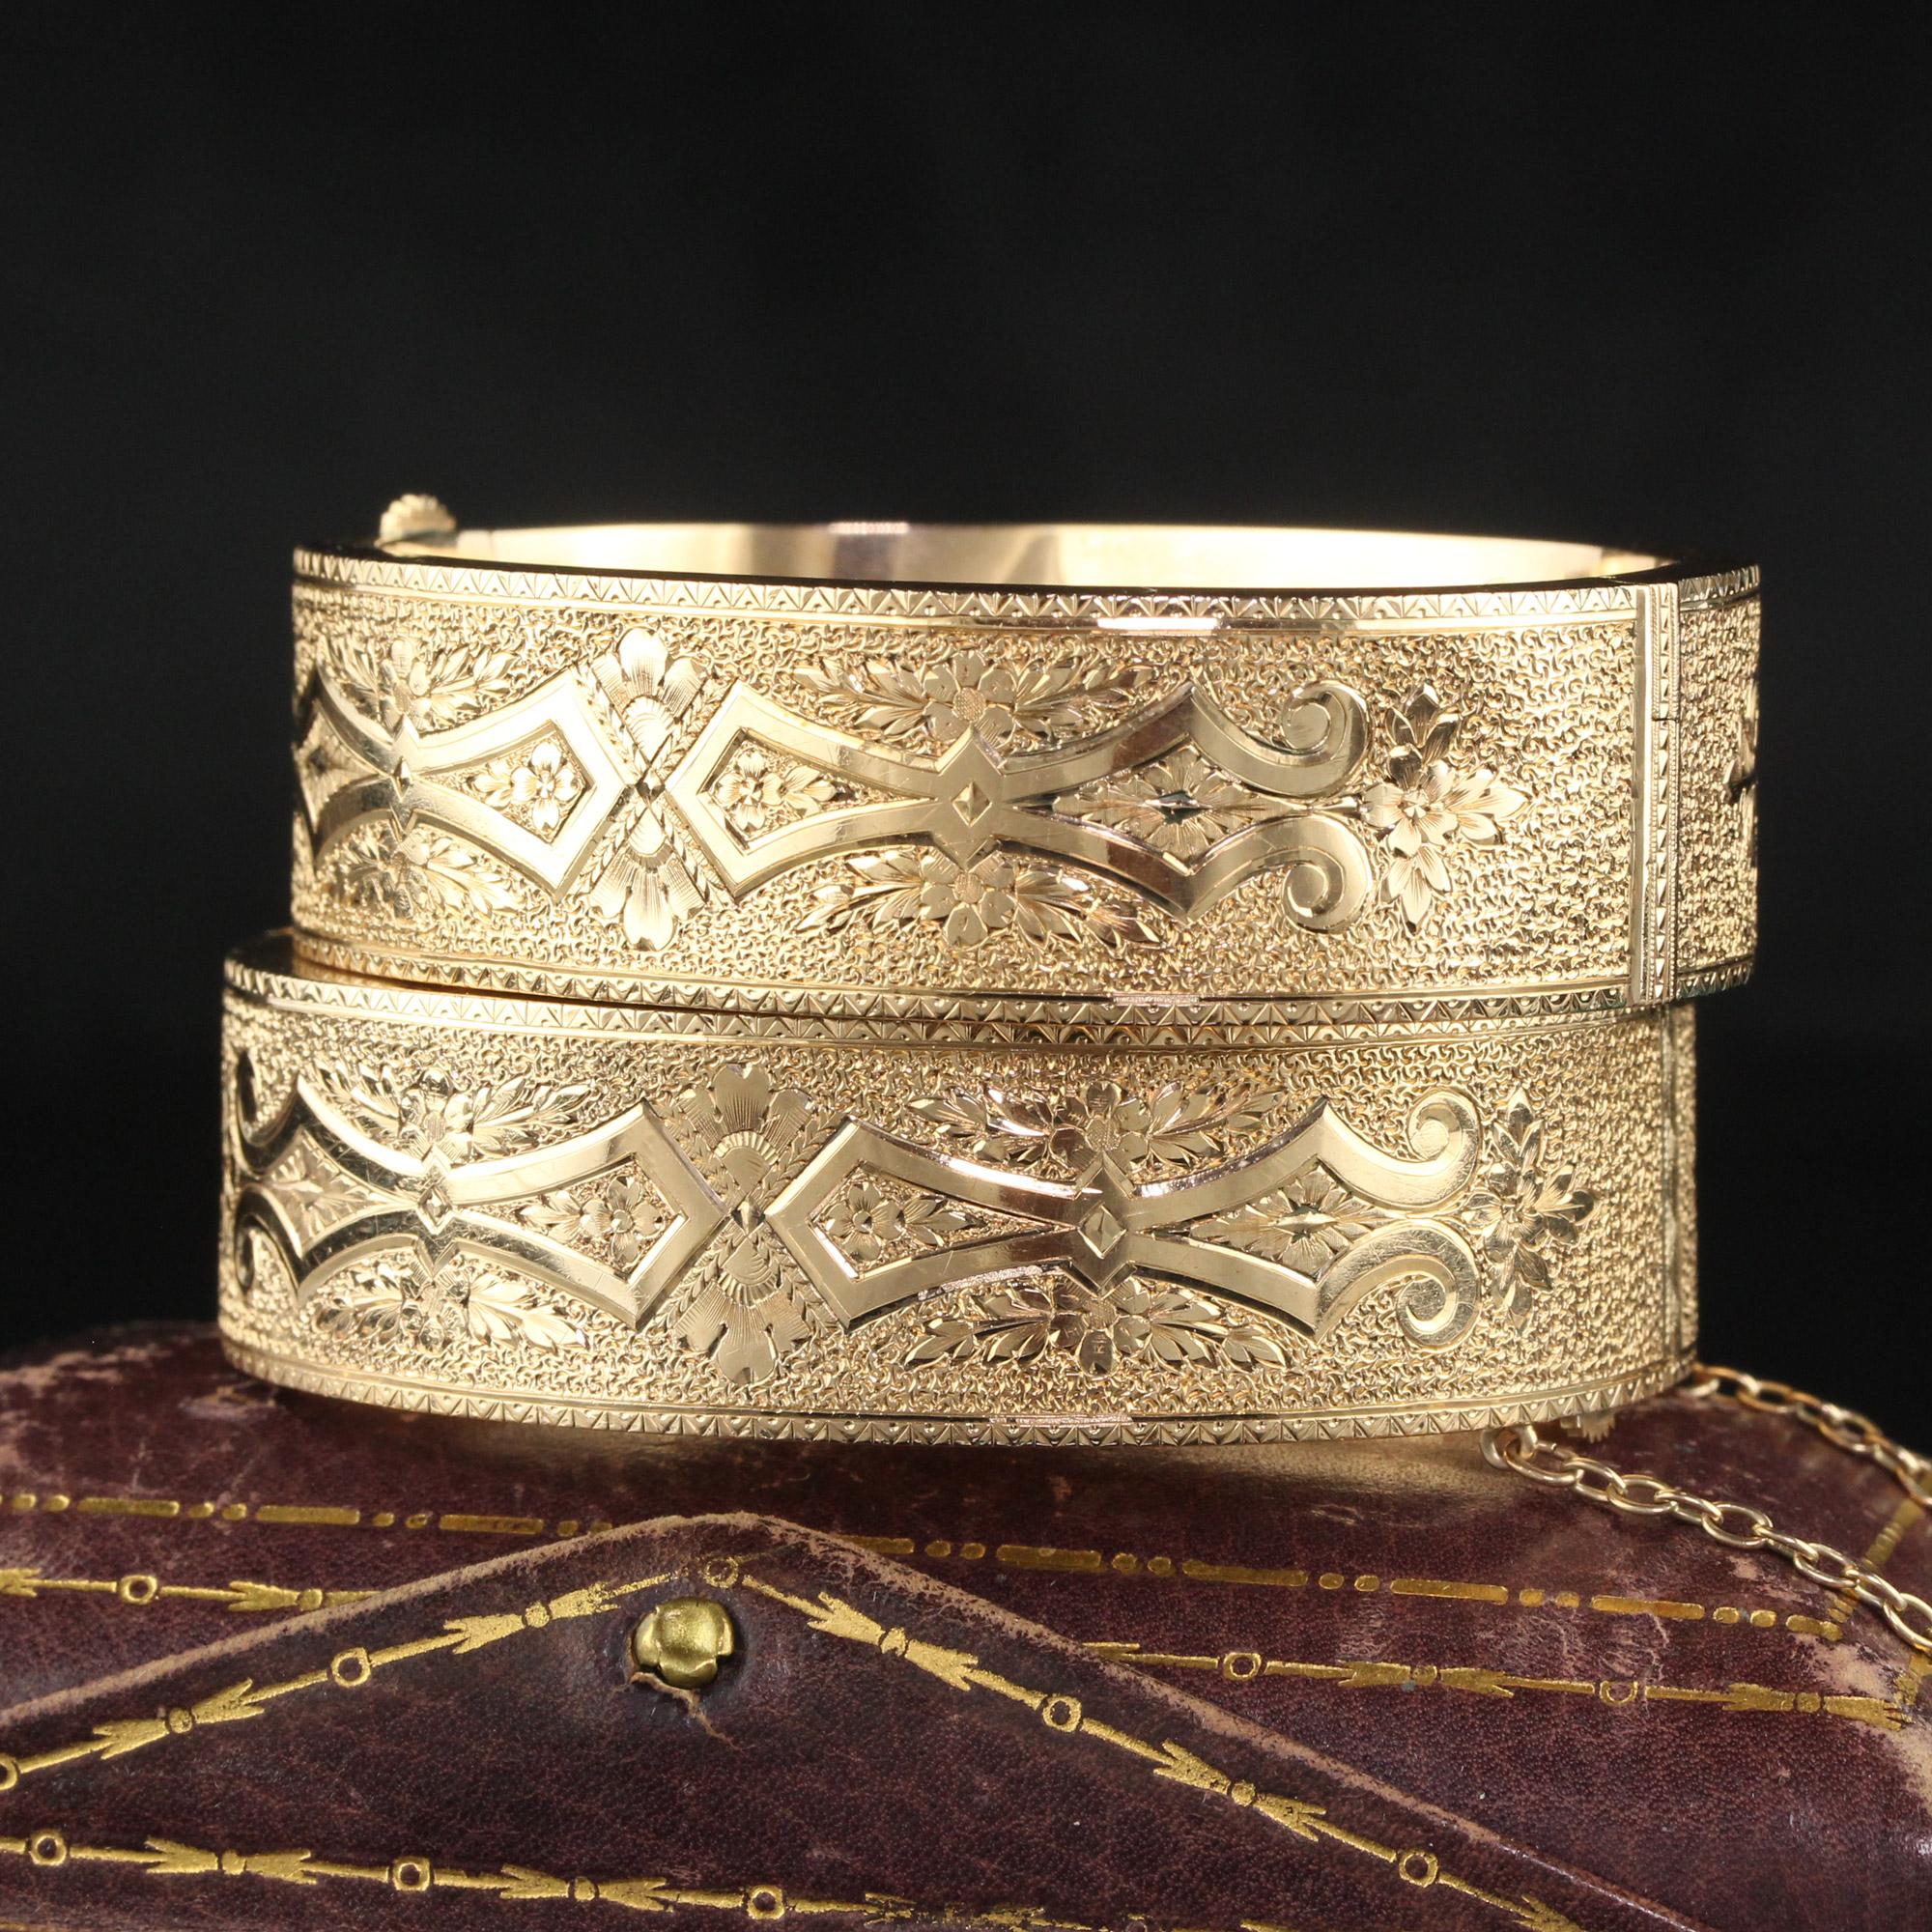 Beautiful Antique Victorian 14K Yellow Gold Engraved Wide Bangle Bracelet Set. This incredible pair of matching bangle bracelets are crafted in 14k. The bangles are beautifully engraved around the entire bracelet. There are some minor dents on the